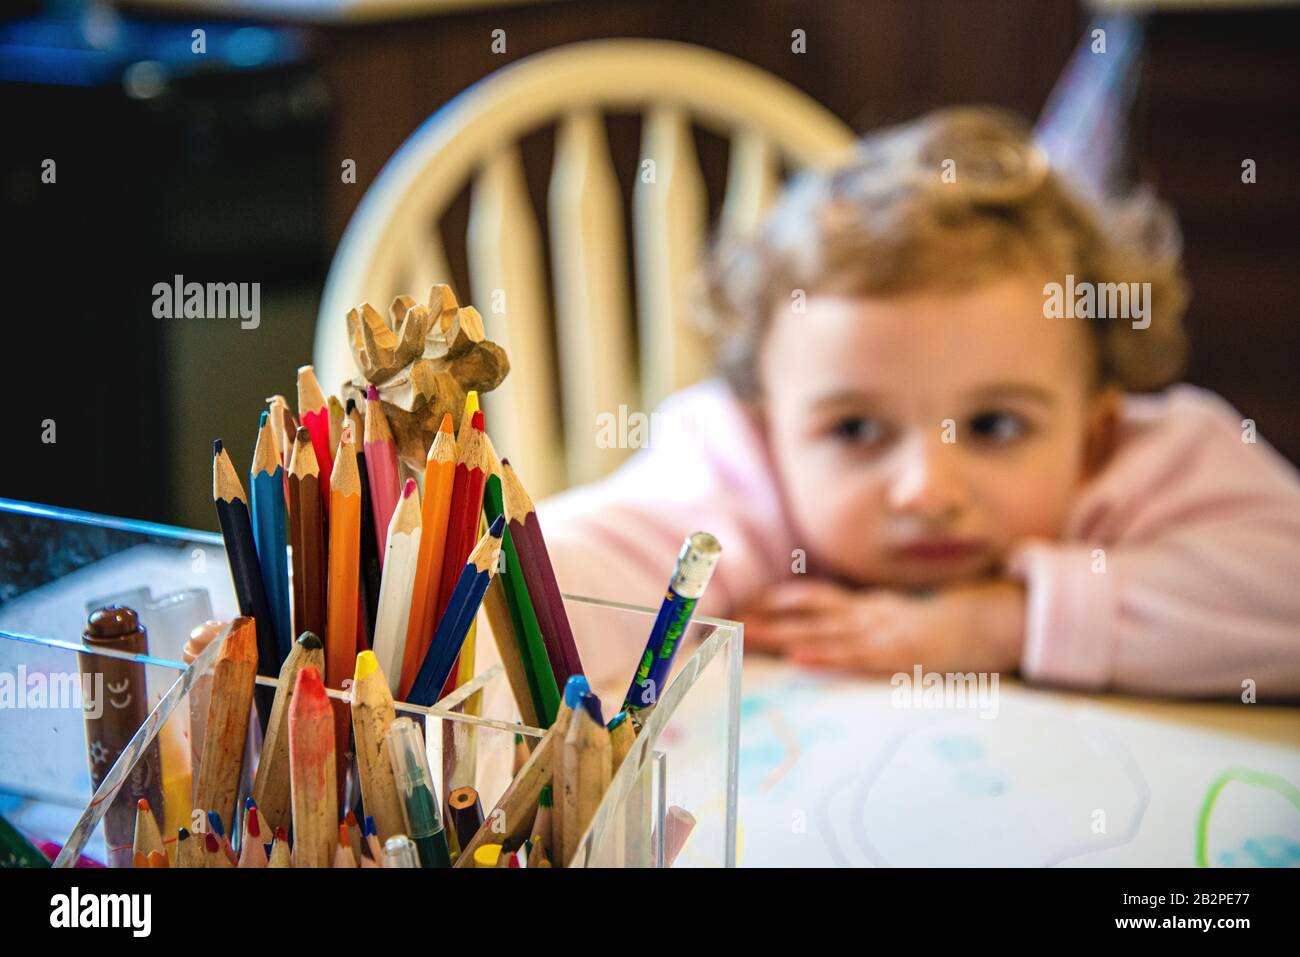 close up of plastic box shaped holder,with multi colored pencils and crayons,young girl looking bored in the background,out of focus. Stock Photo